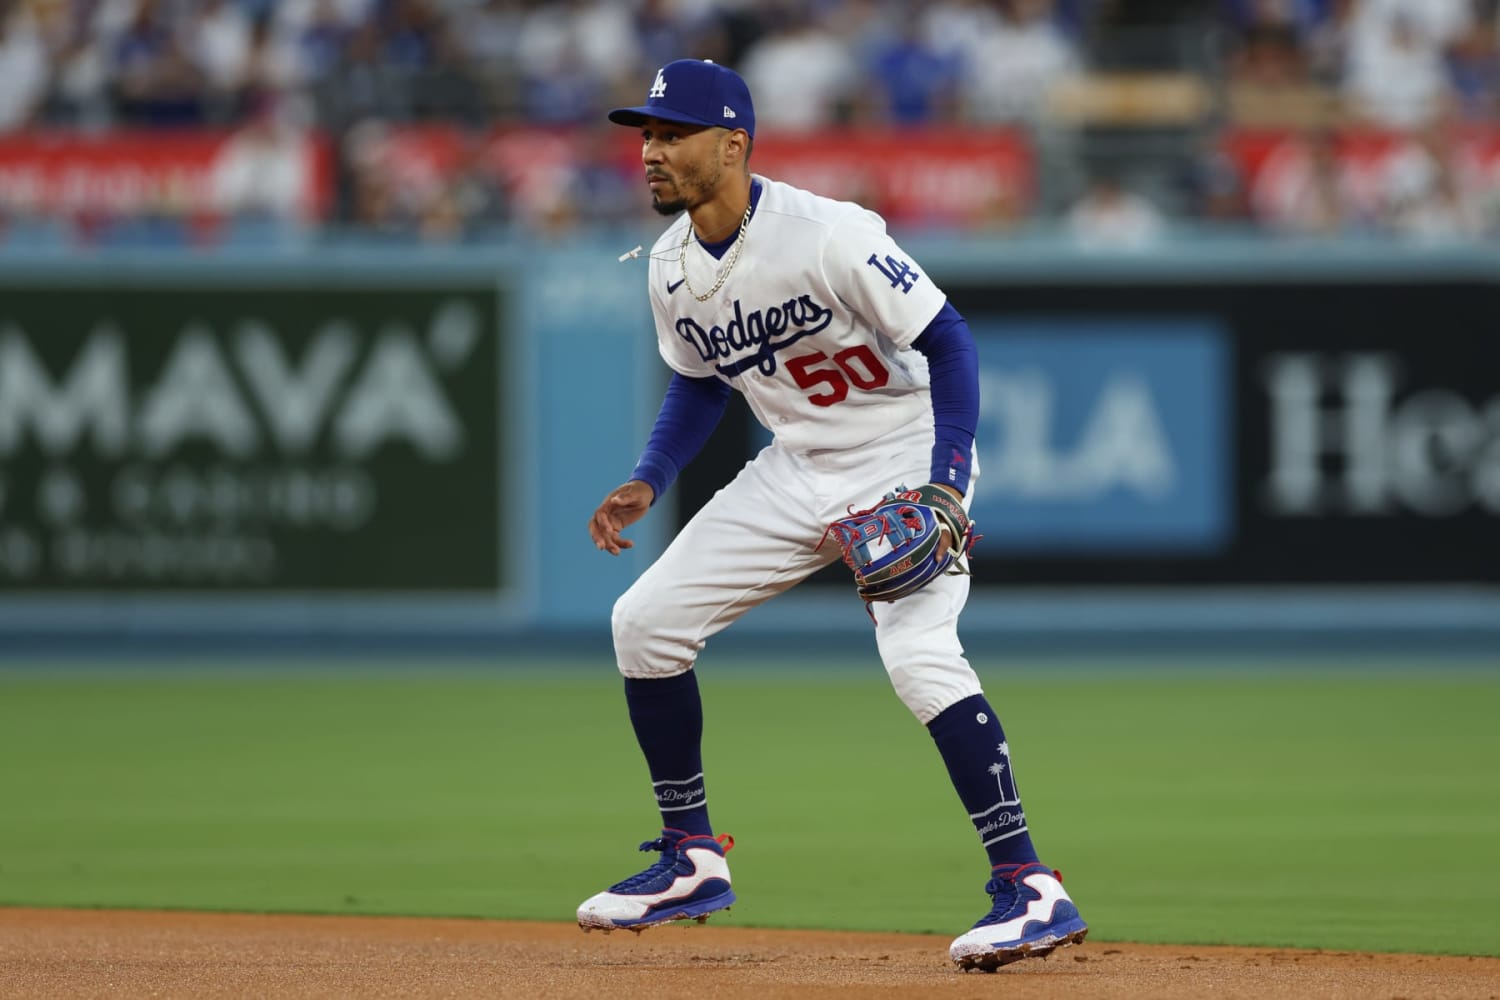 Mets' Javy Báez, Francisco Lindor apologize after thumbs down to